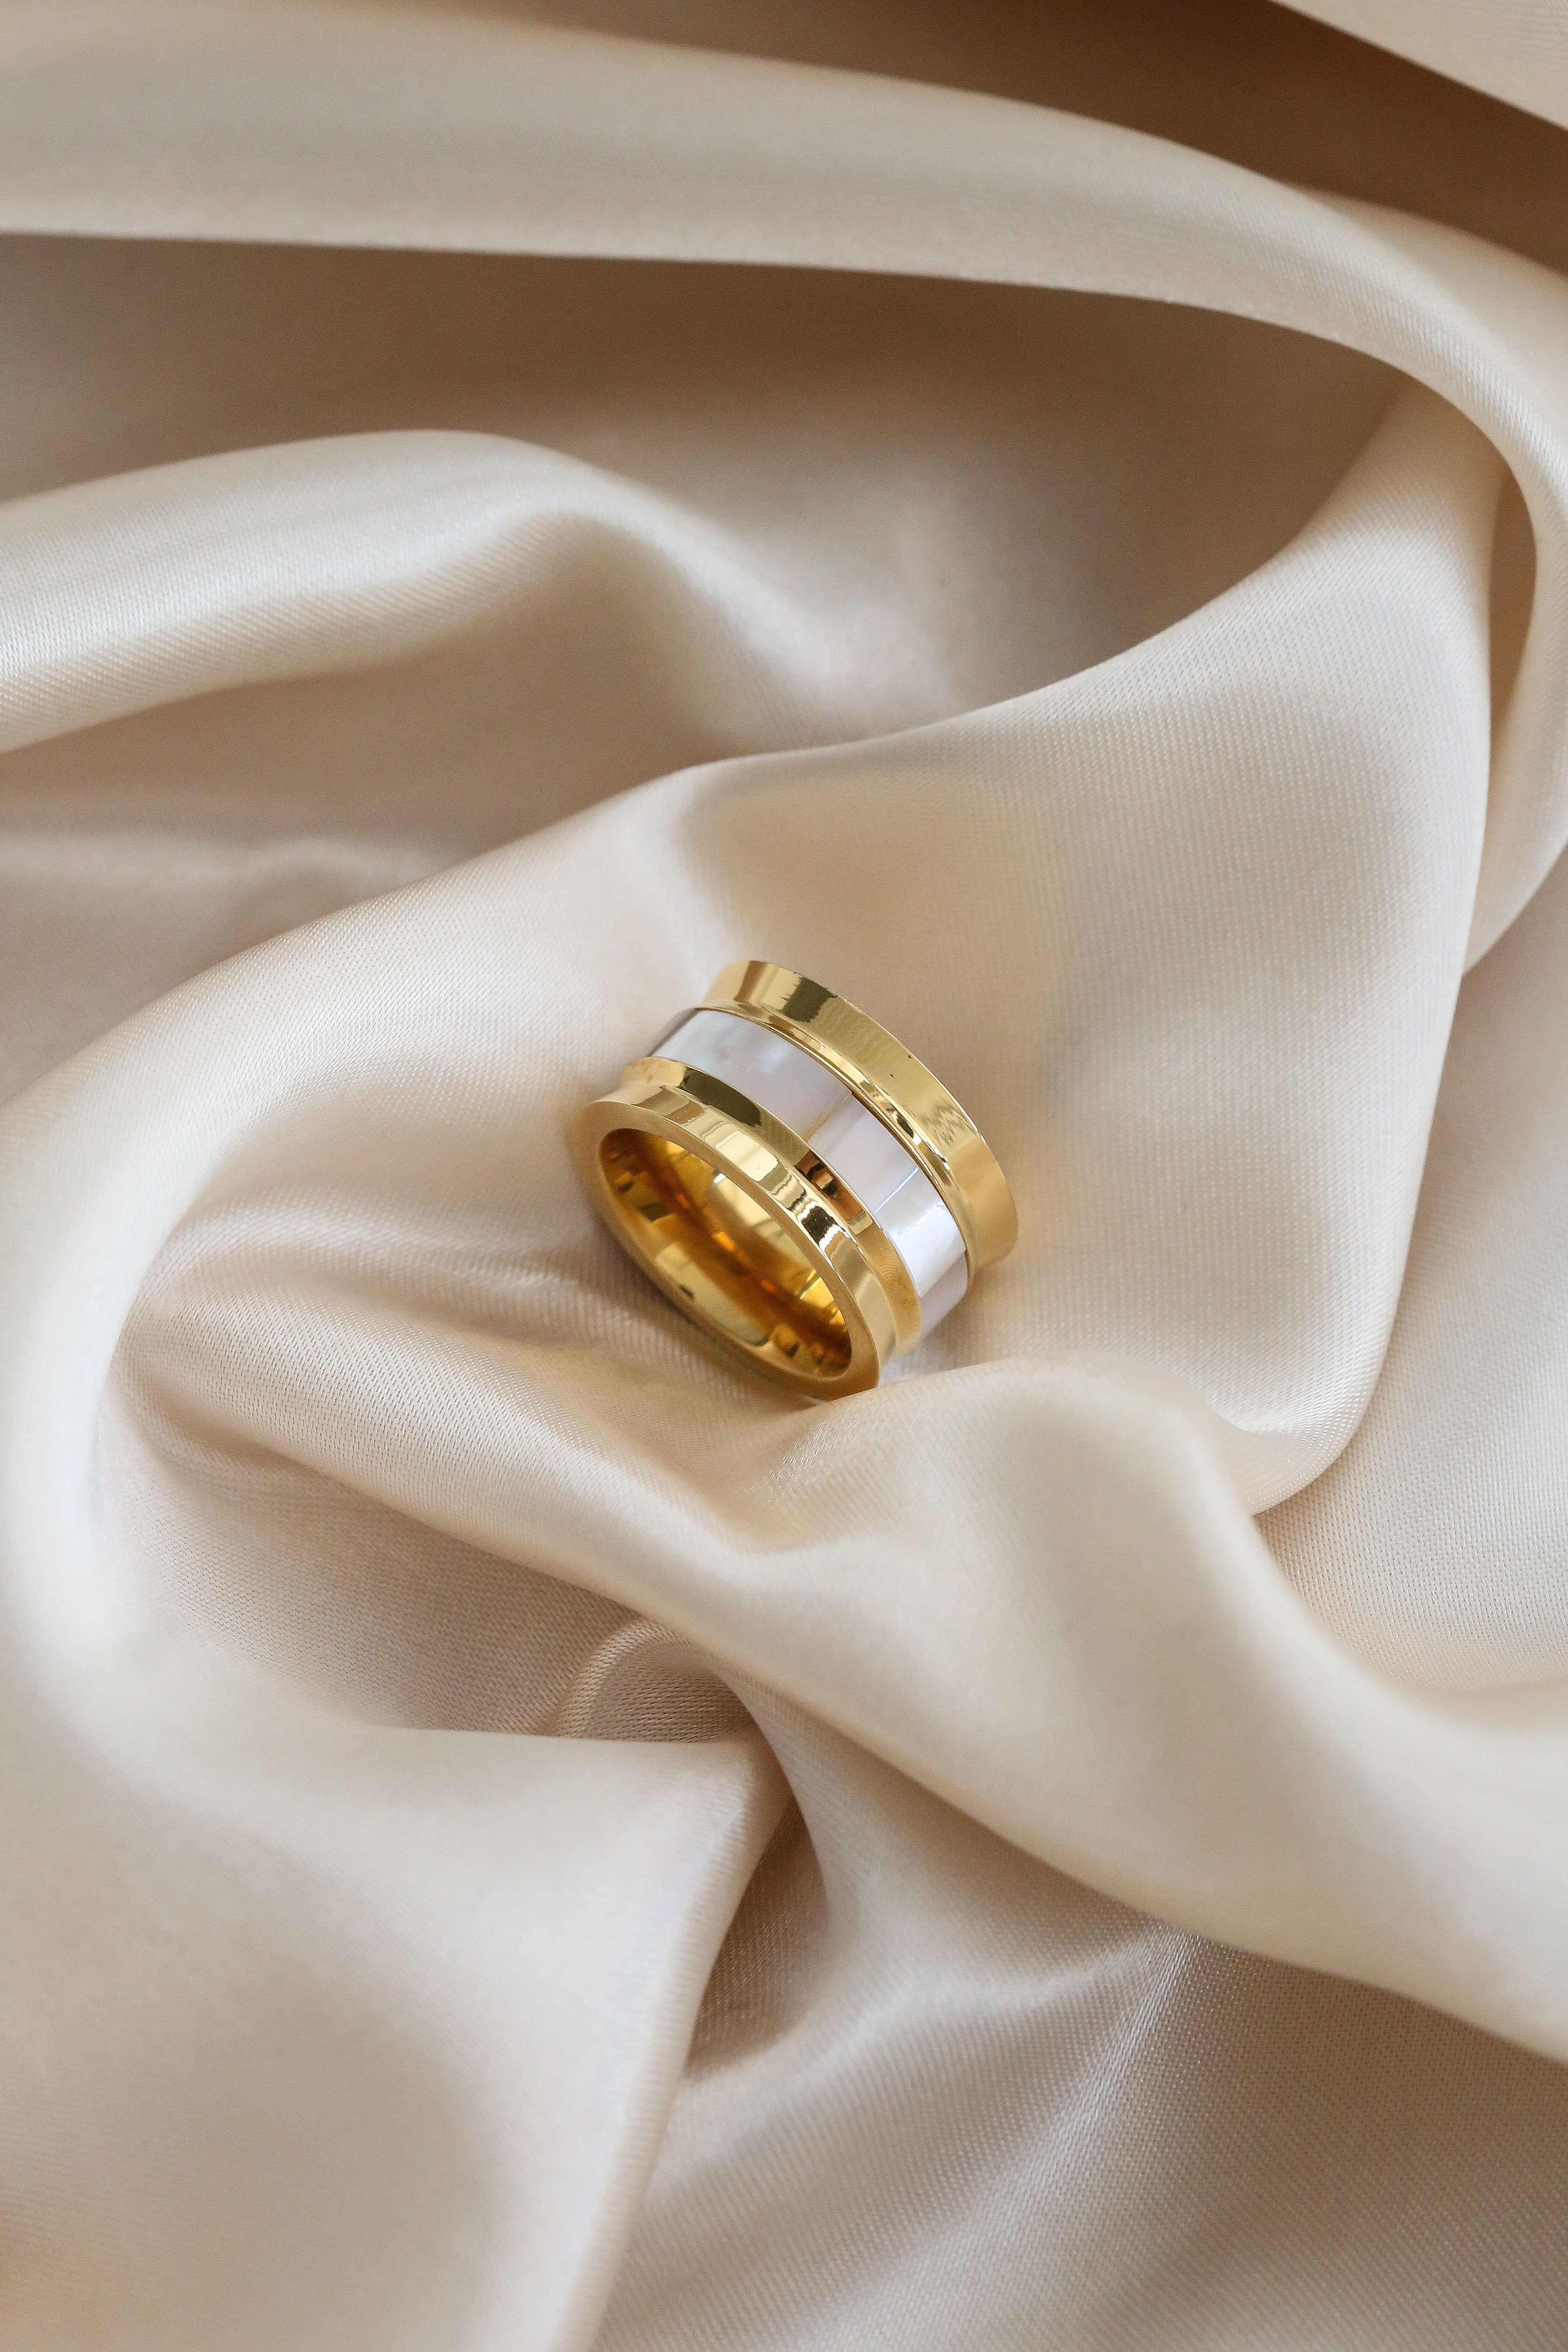 Cinque Terre Ring - Boutique Minimaliste has waterproof, durable, elegant and vintage inspired jewelry